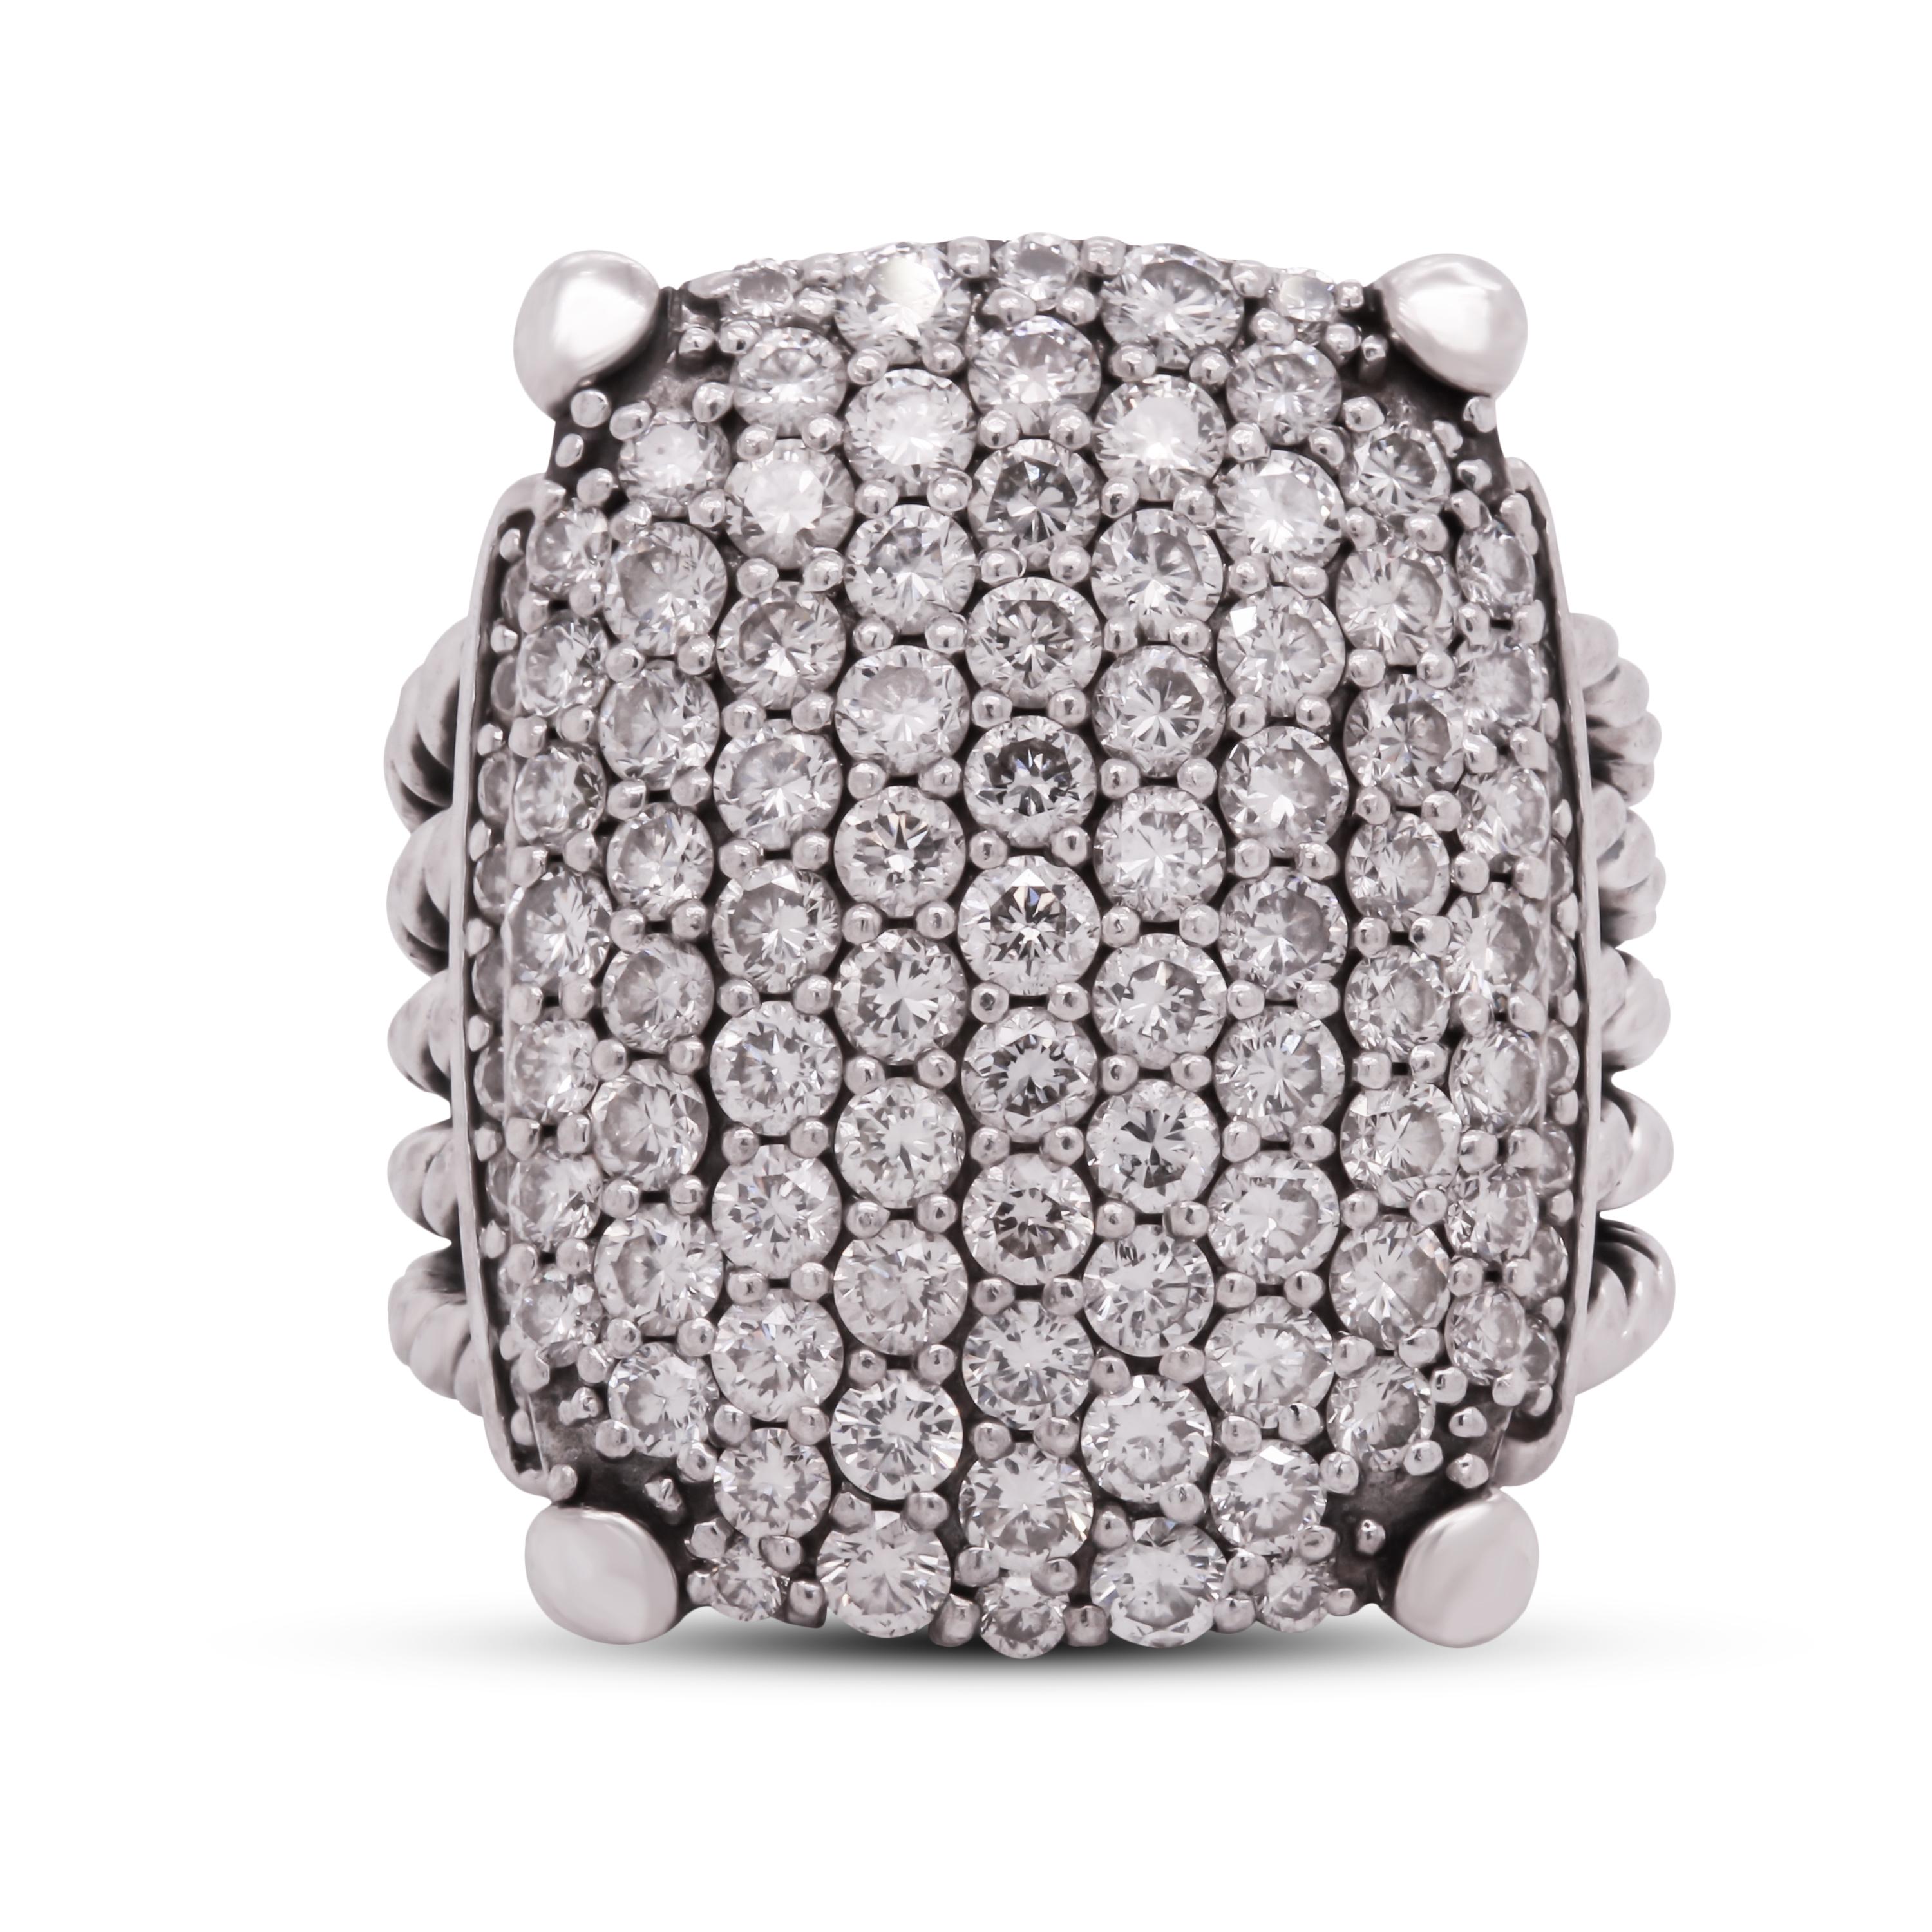 David Yurman Wheaton Collection Diamond Sterling Silver Cocktail Ring

Apprx. 1.12carat G-H, VS-SI clarity diamonds total weight

Ring retails for $2,950. 

Excellent condition.

Ring face measures 0.86 inch width.

Size 6, sizable by